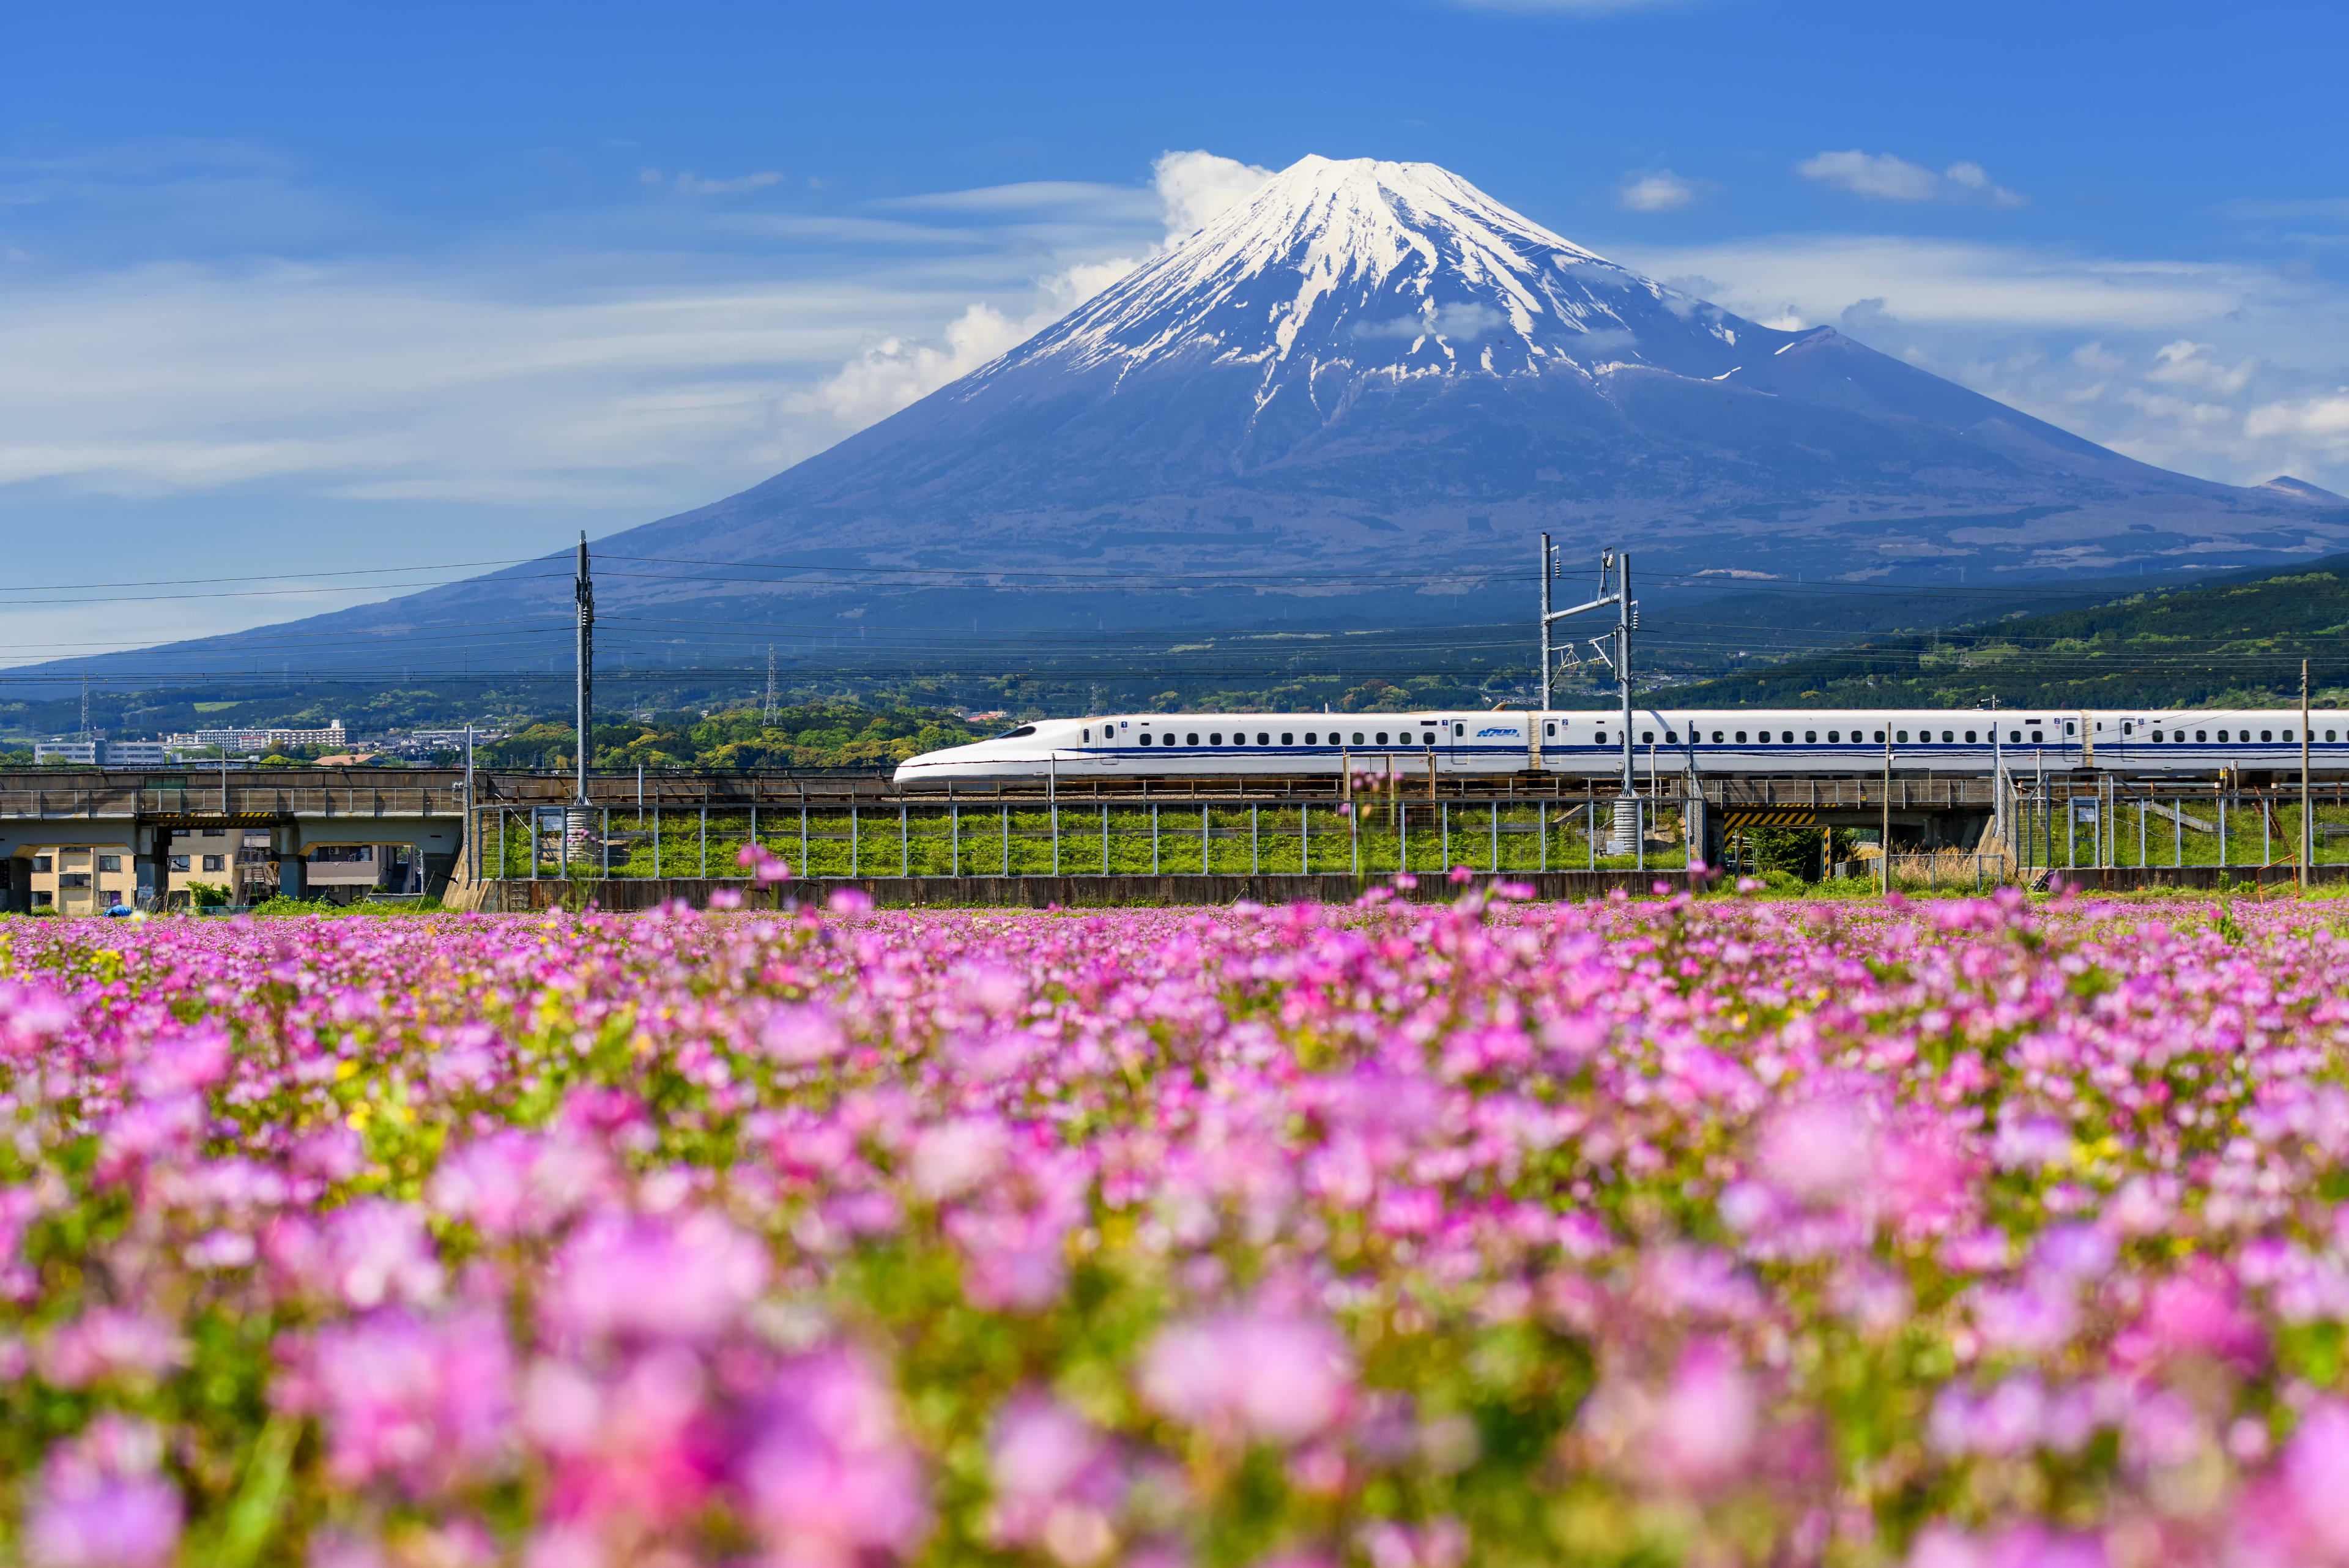 See the iconic Mt. Fuji from onboard Japan’s high-speed Shinkansen bullet train.